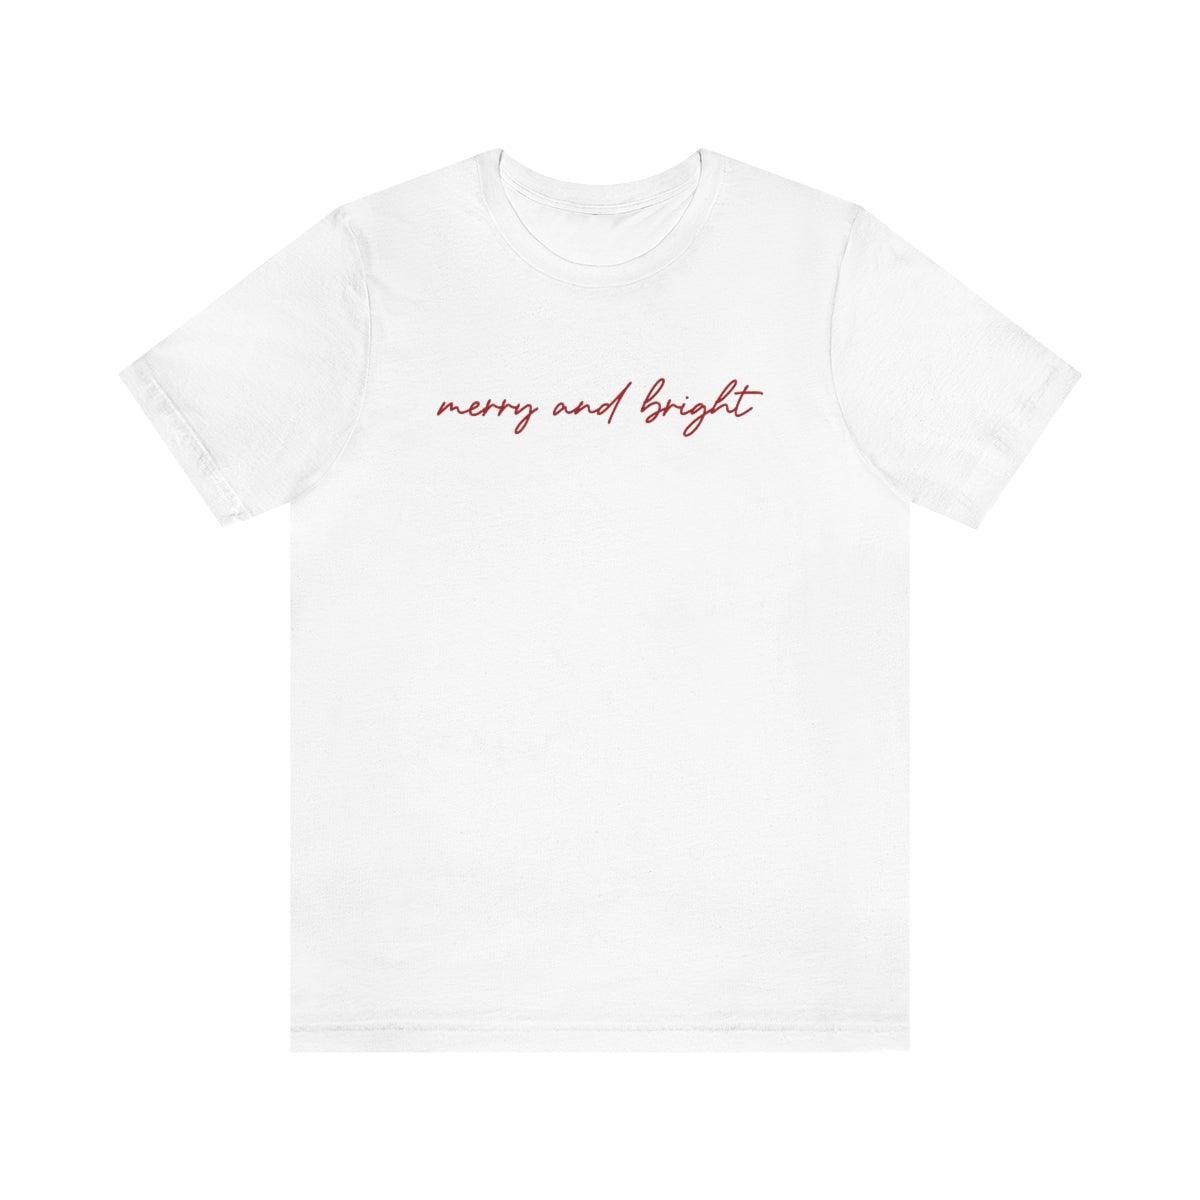 Merry and Bright Simple Christmas Shirt Short Sleeve Tee - Crystal Rose Design Co.